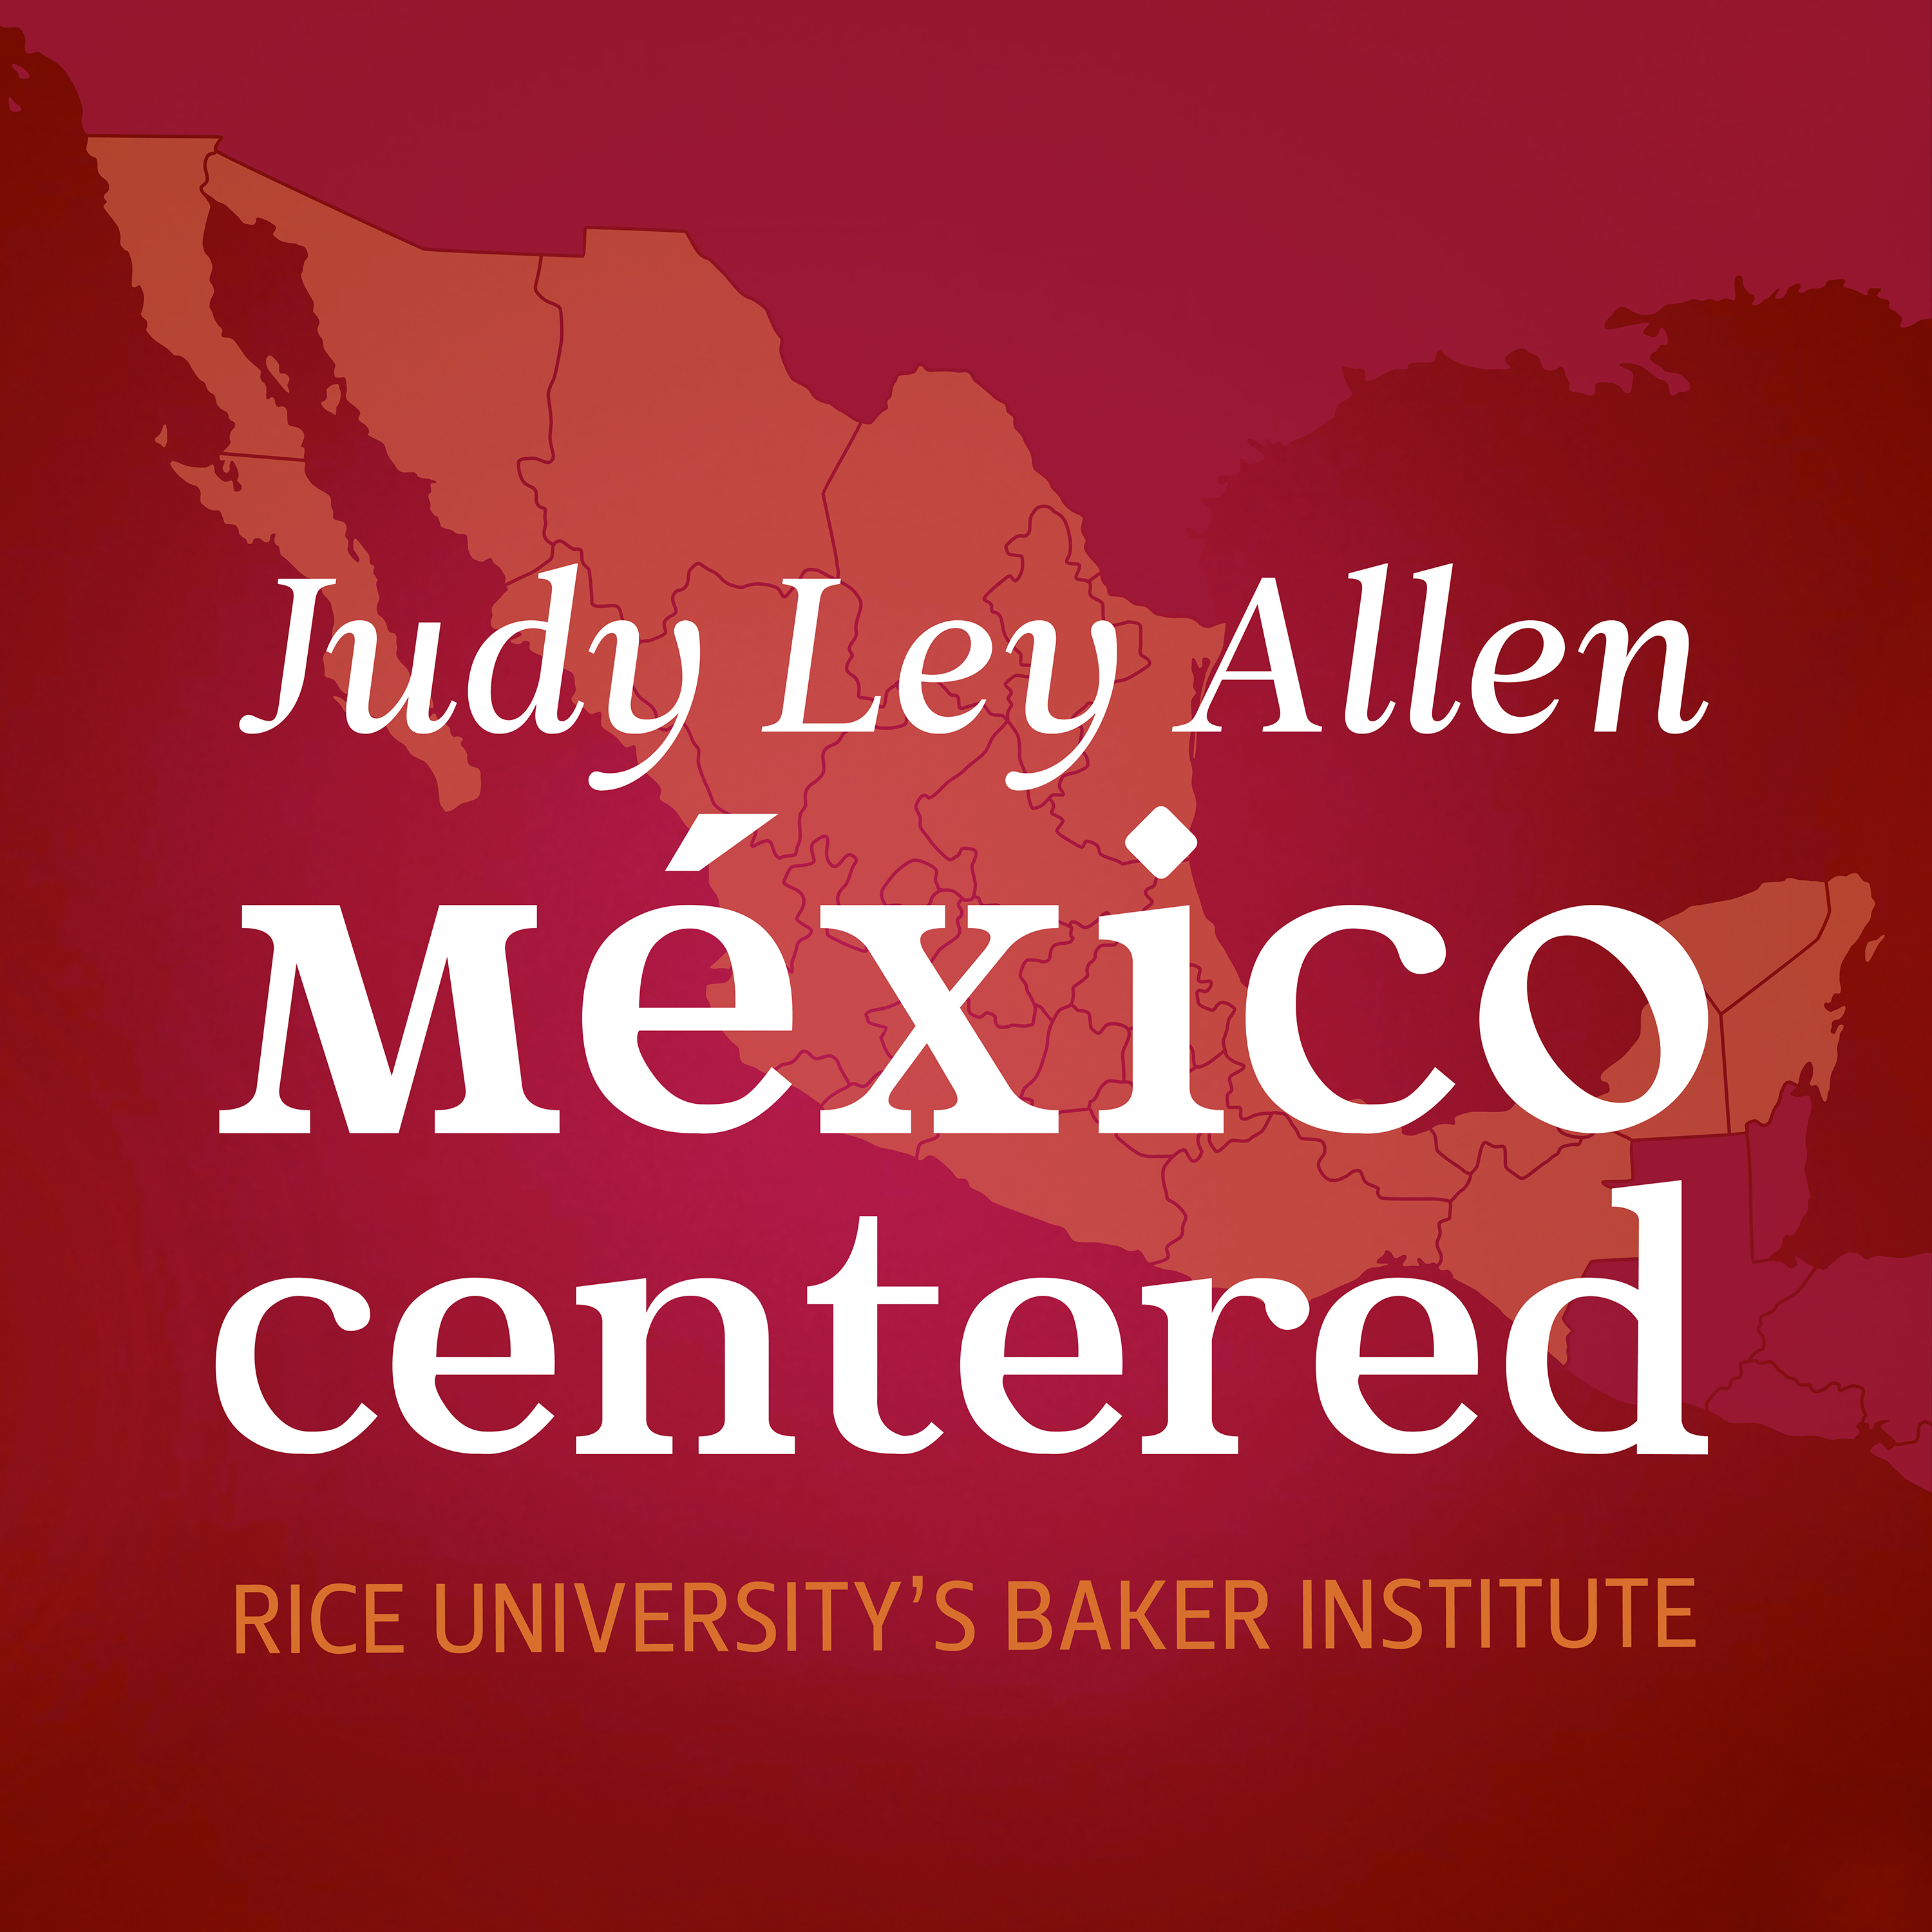 Wordmark for the Judy Ley Allen "Mexico Centered" Podcast